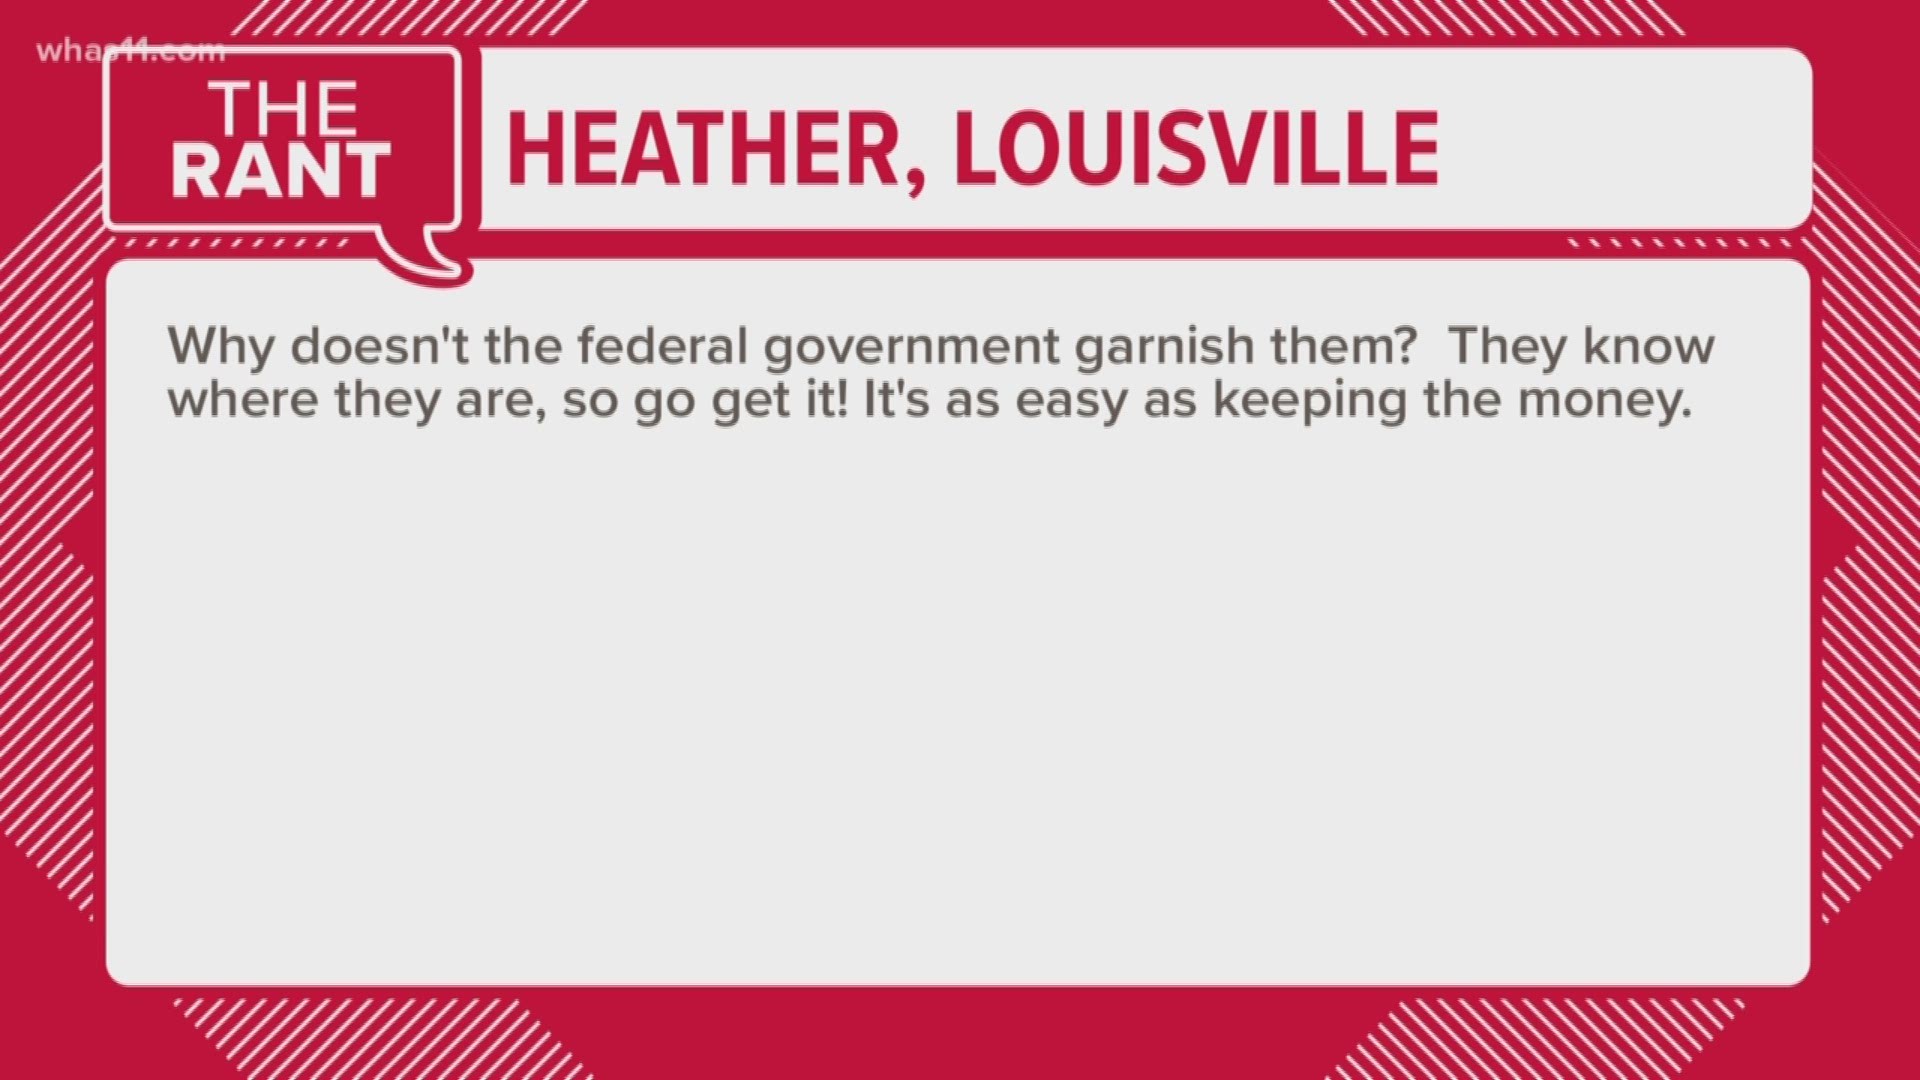 WHAS11's Doug Proffit reads the latest viewer comments on hot topics around Kentuckiana.